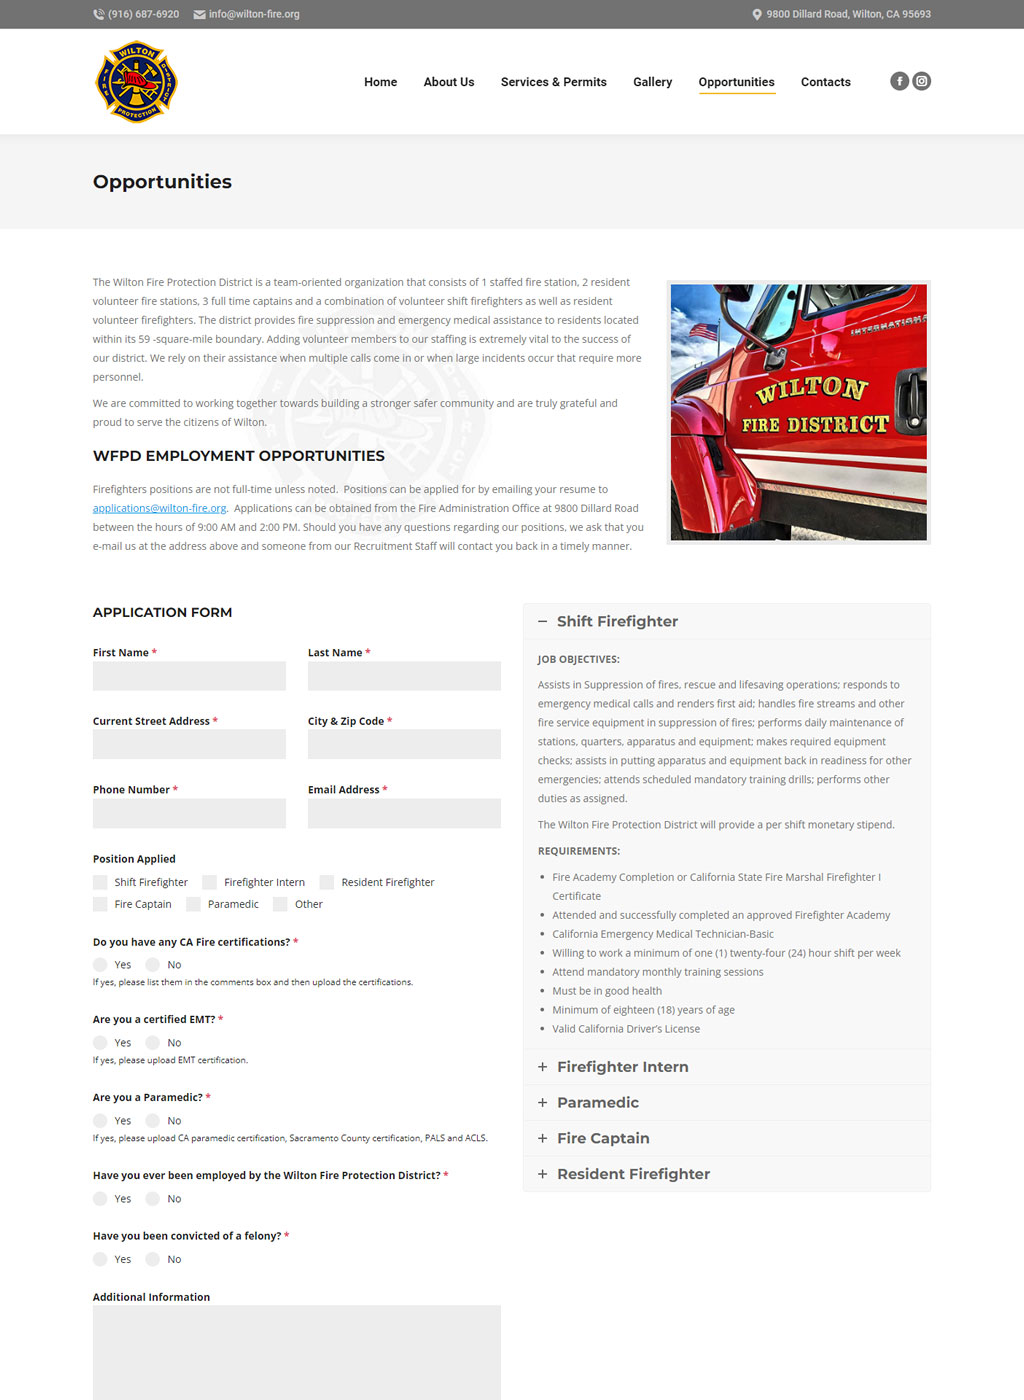 Website developed for Wilton Fire Protection District